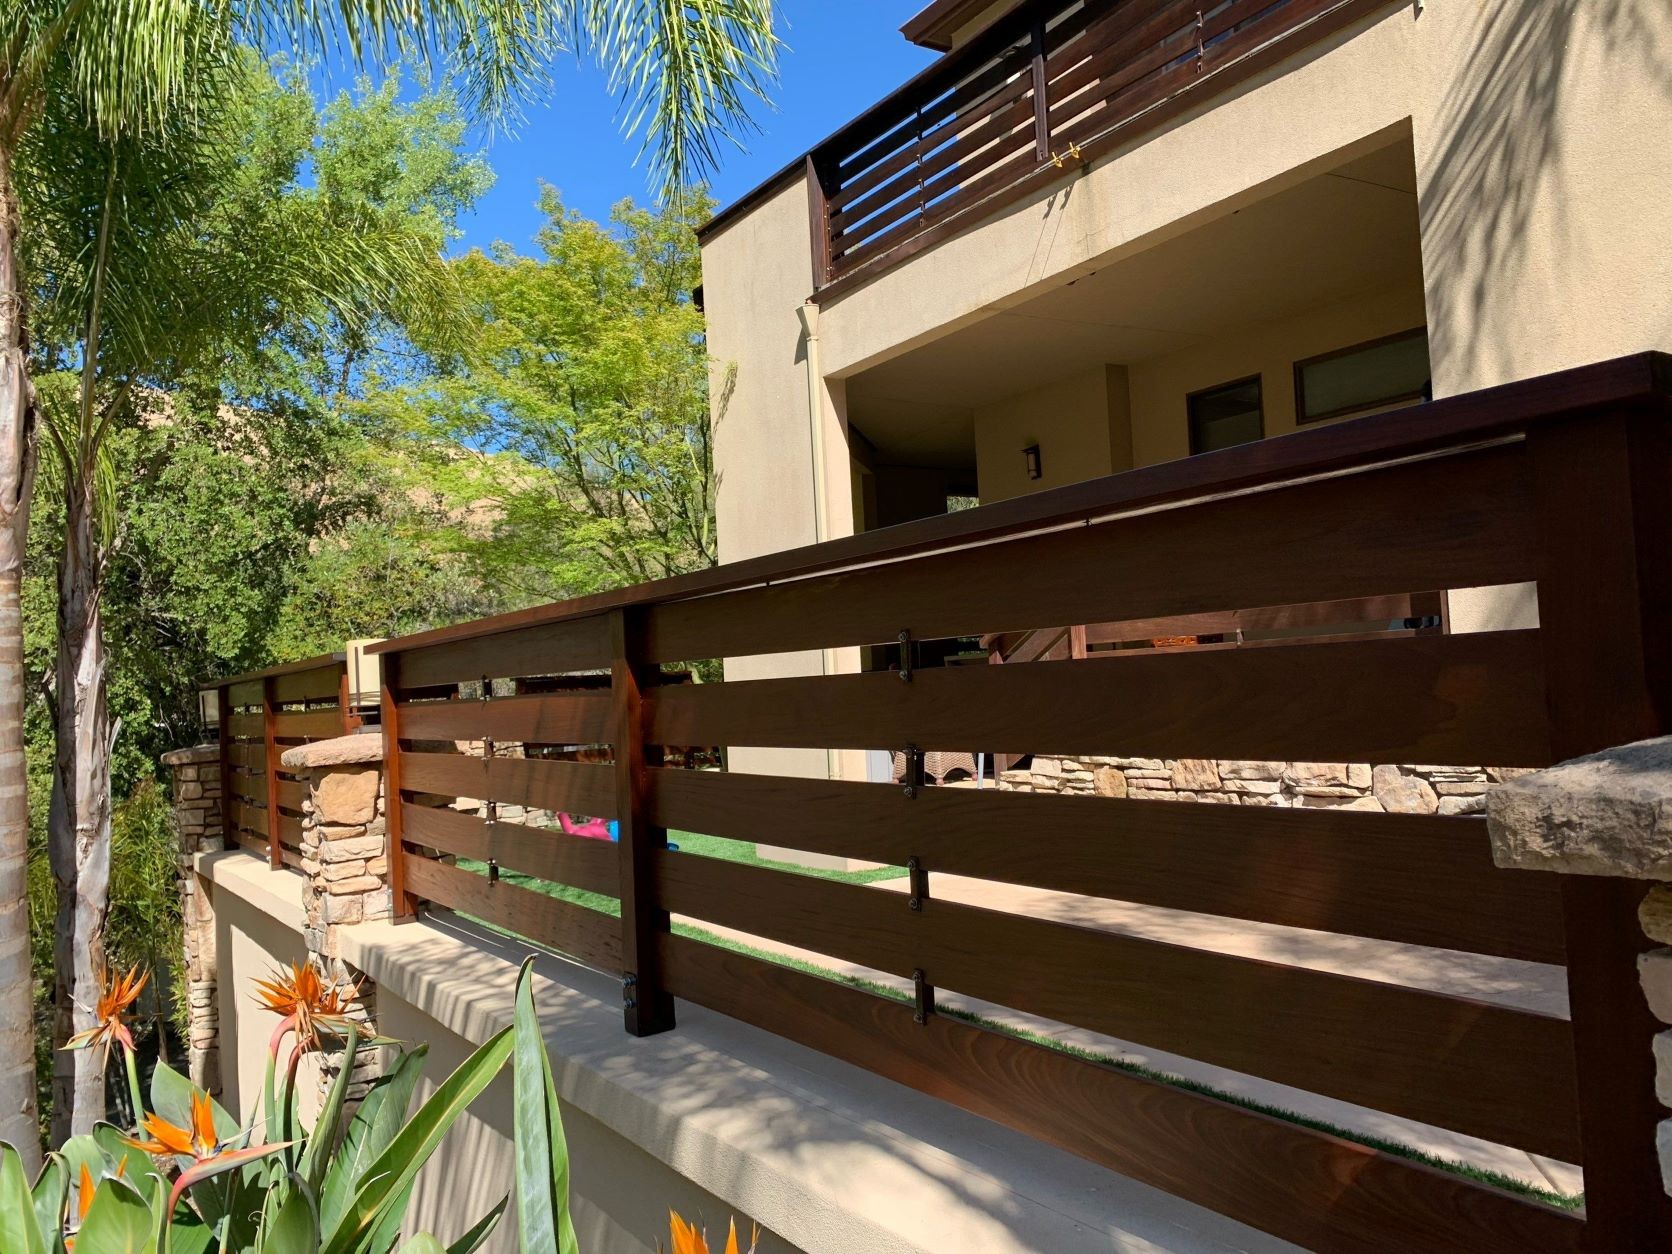 Fence & Deck Staining for Ready Repaint in Brentwood, CA